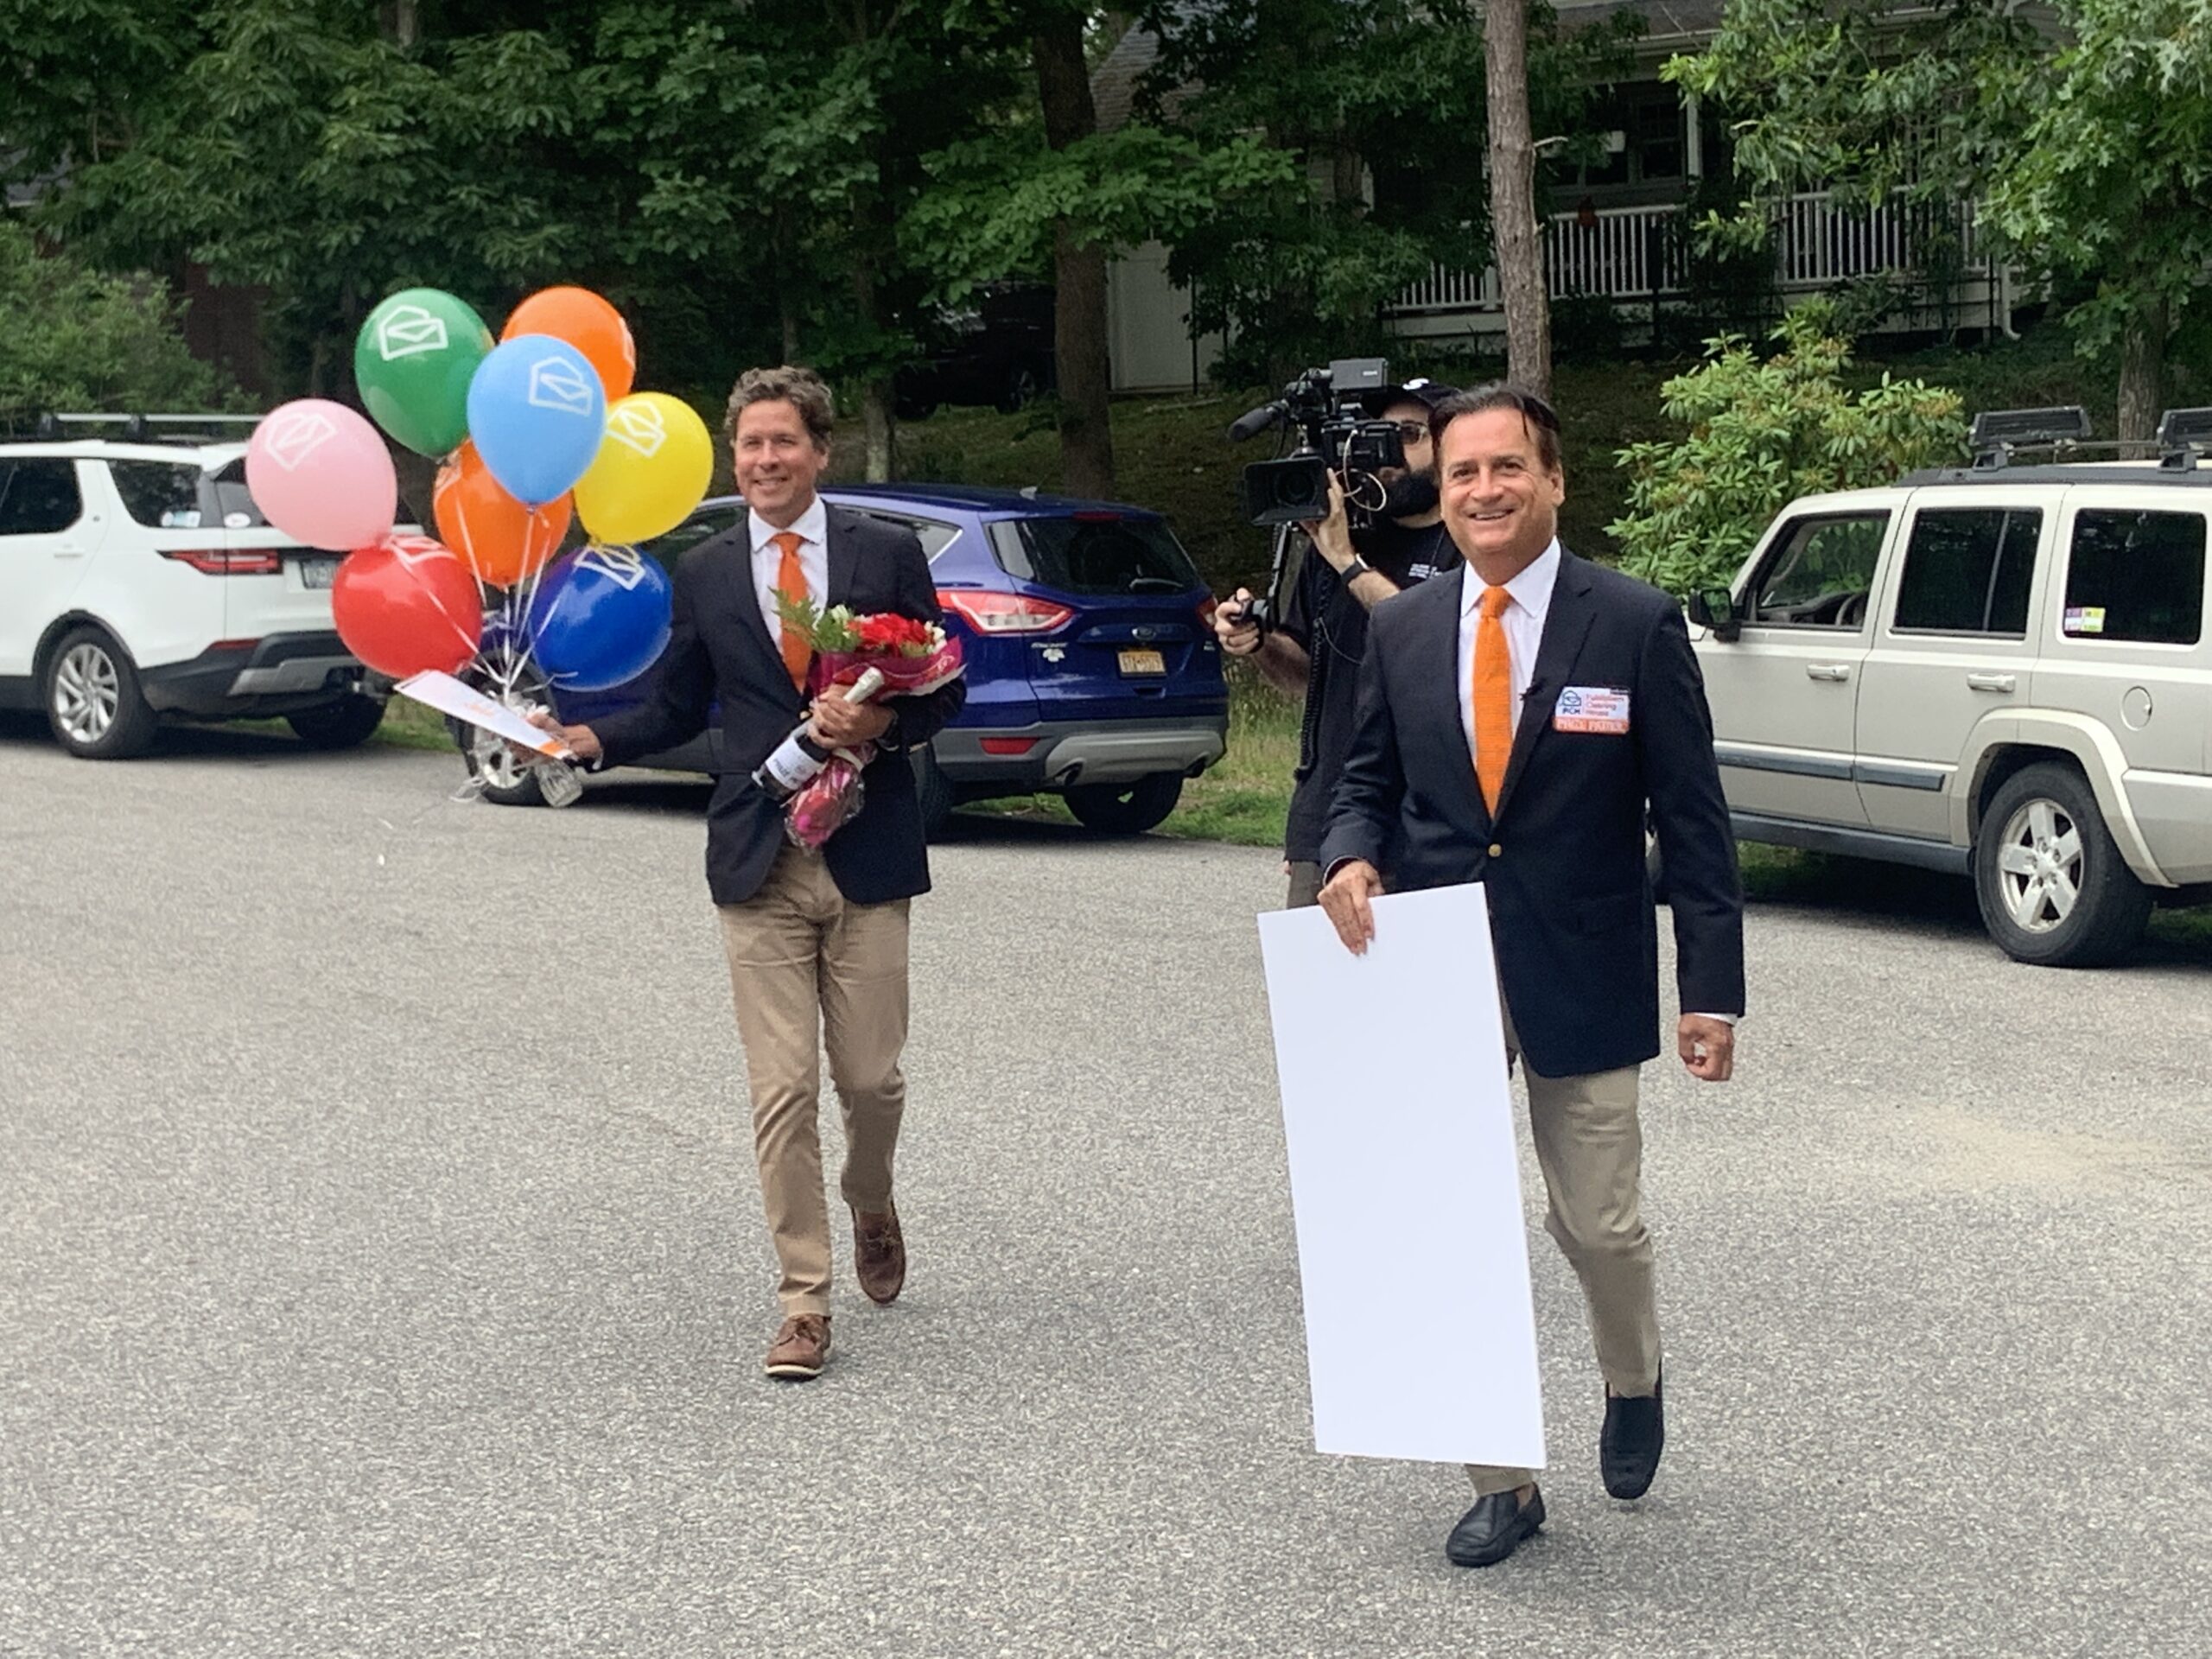 Howie Guja, left, and Todd Sloane, with cameraman George Mantzoutsos trailing close behind, make their way to Lynn Bromberg's Noyac home. STEPHEN J. KOTZ